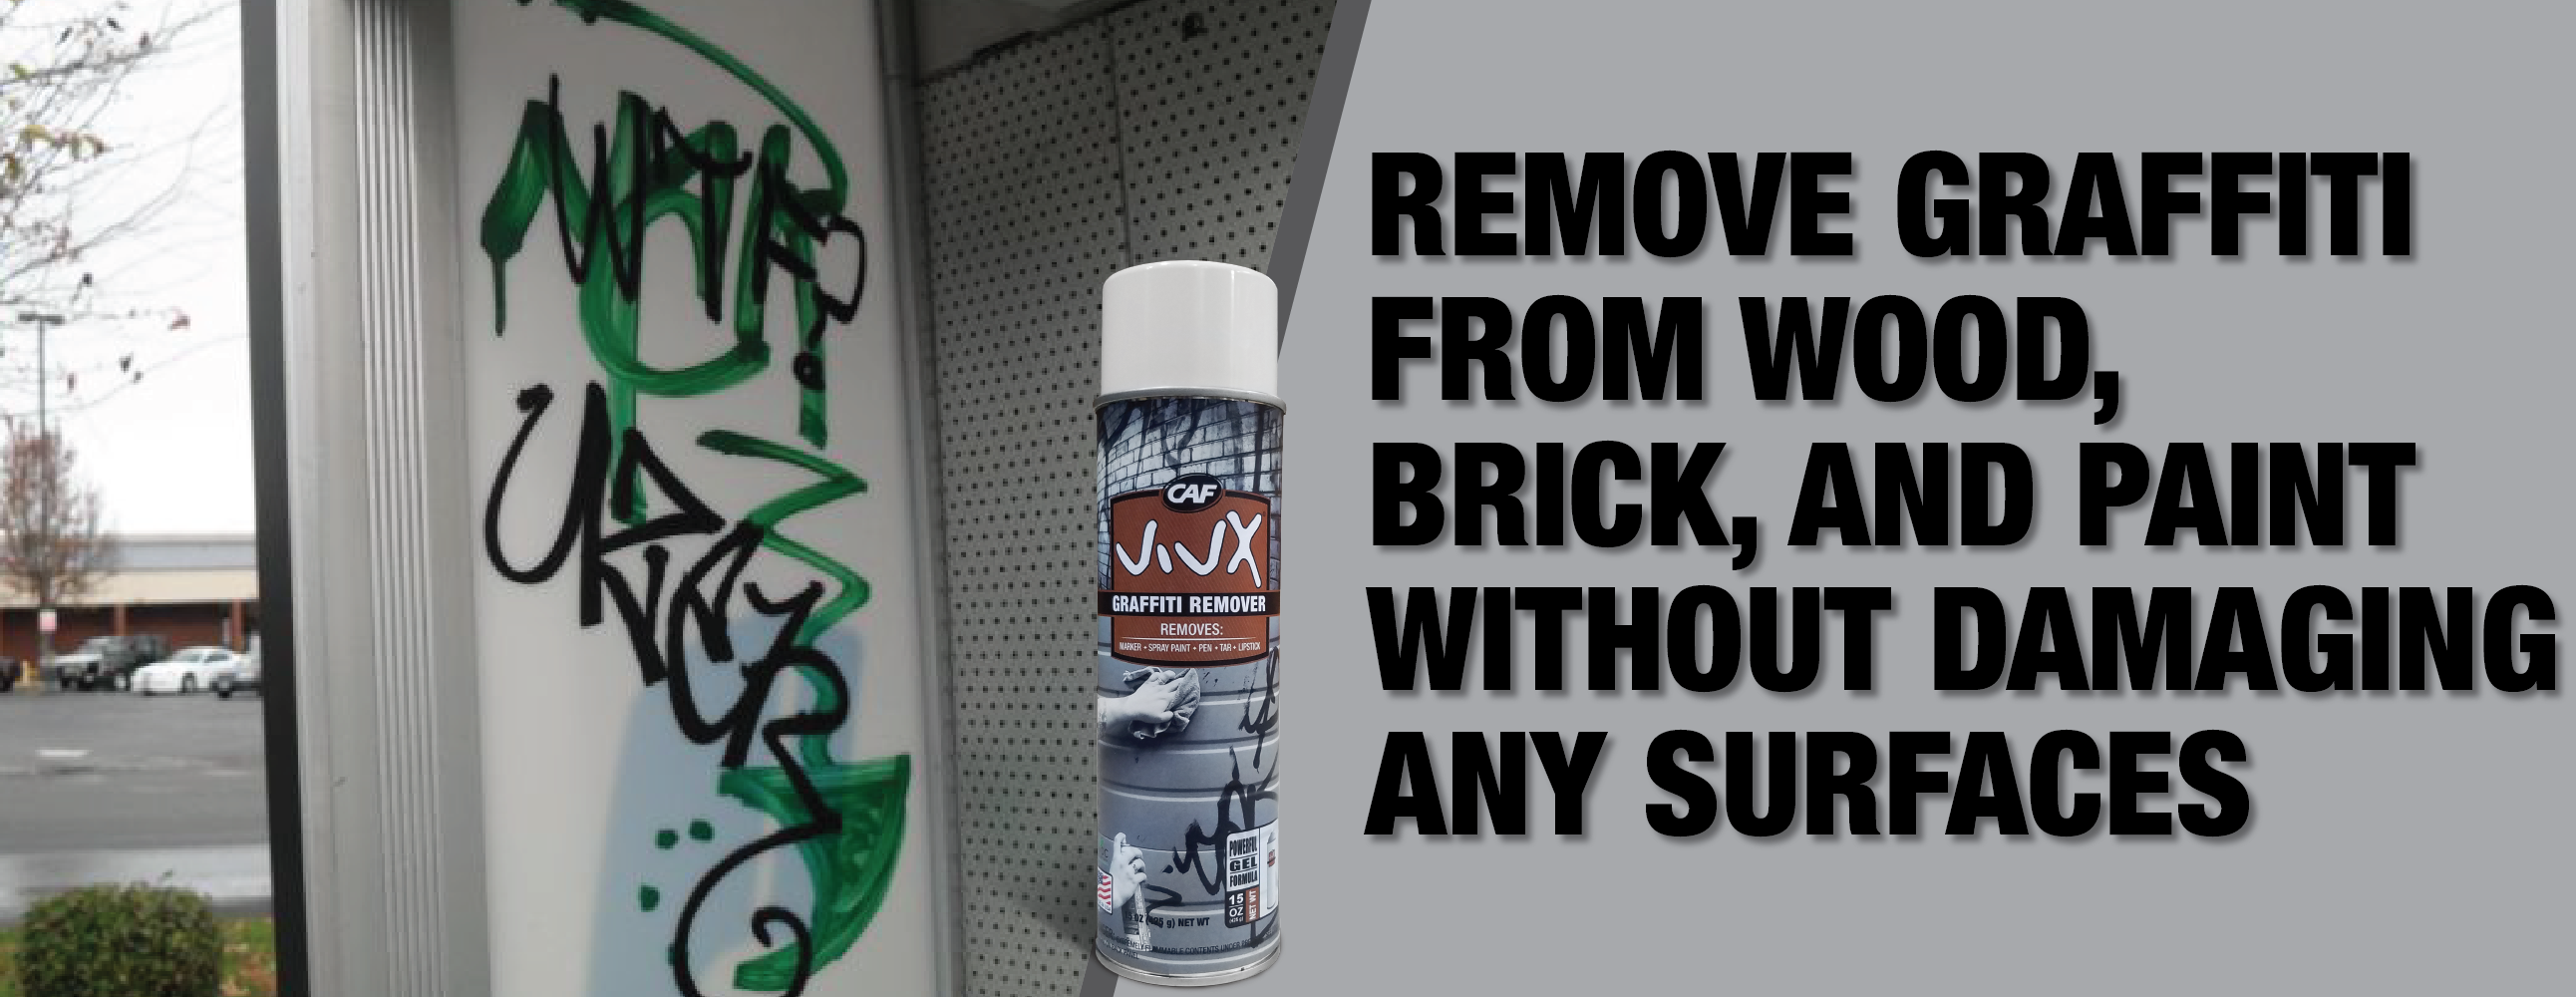 How to Safely Remove Graffiti